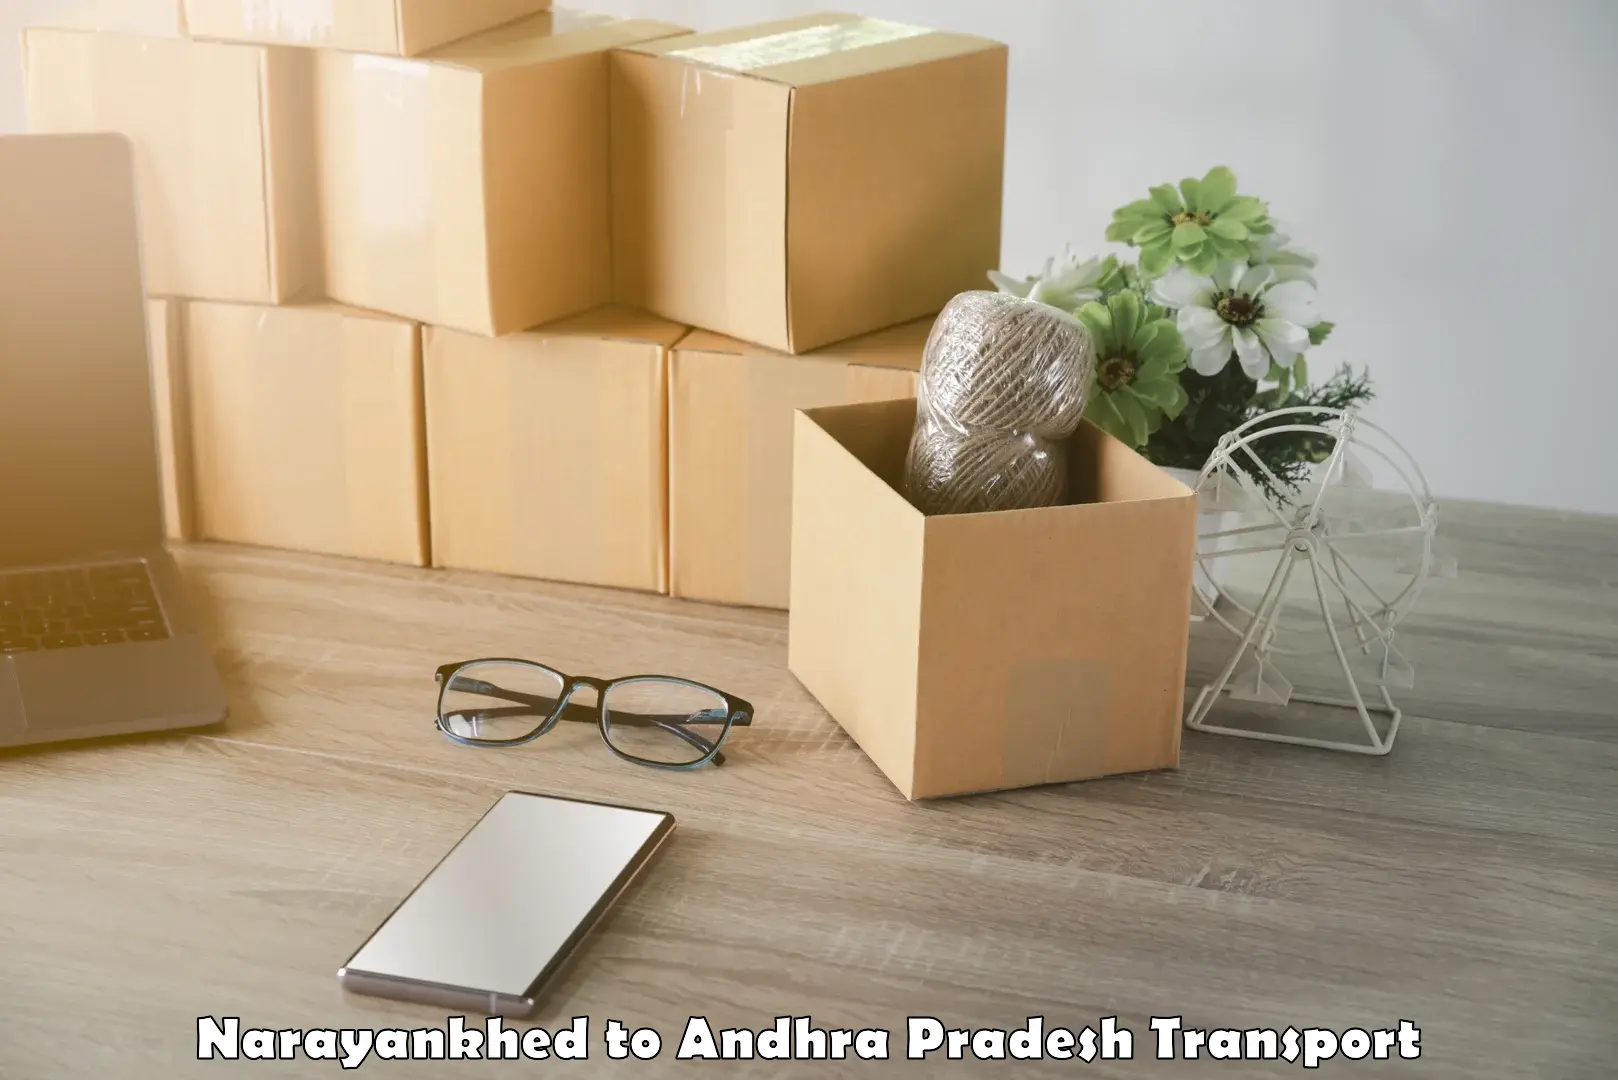 Truck transport companies in India Narayankhed to Andhra Pradesh